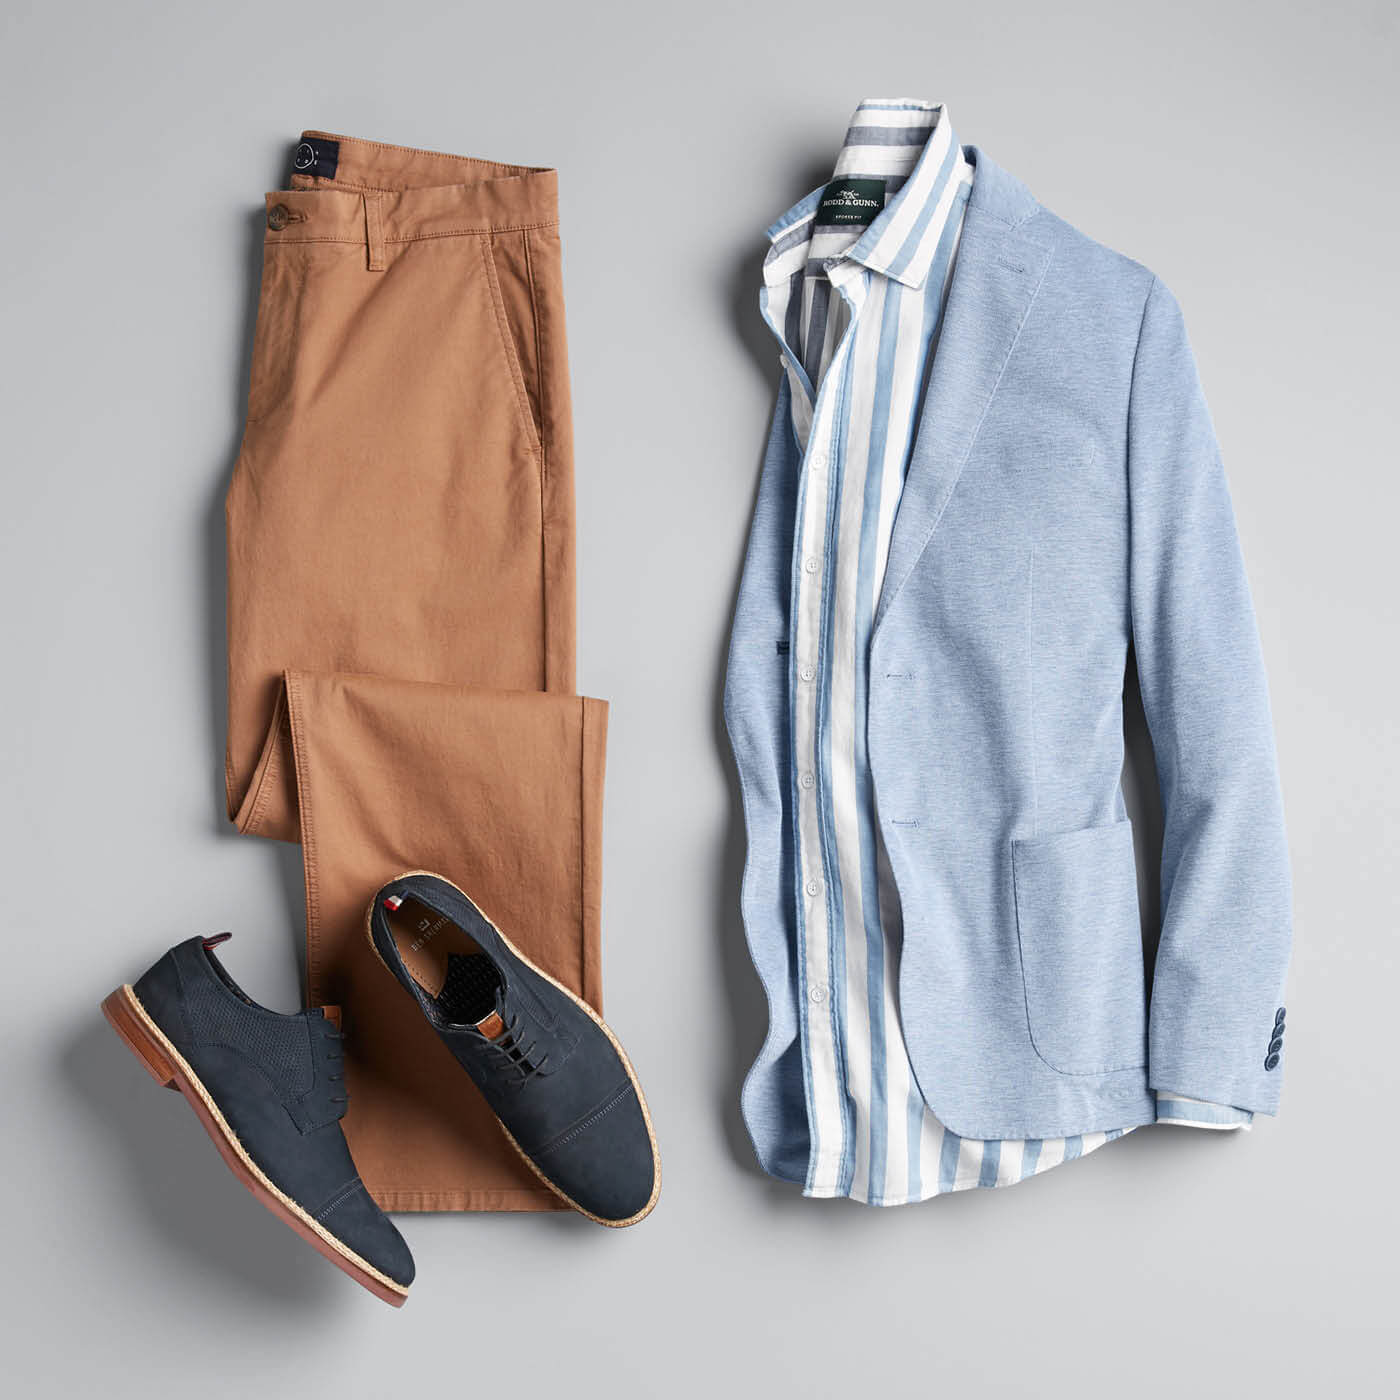 Spring Men's Wedding Guest Outfits to 